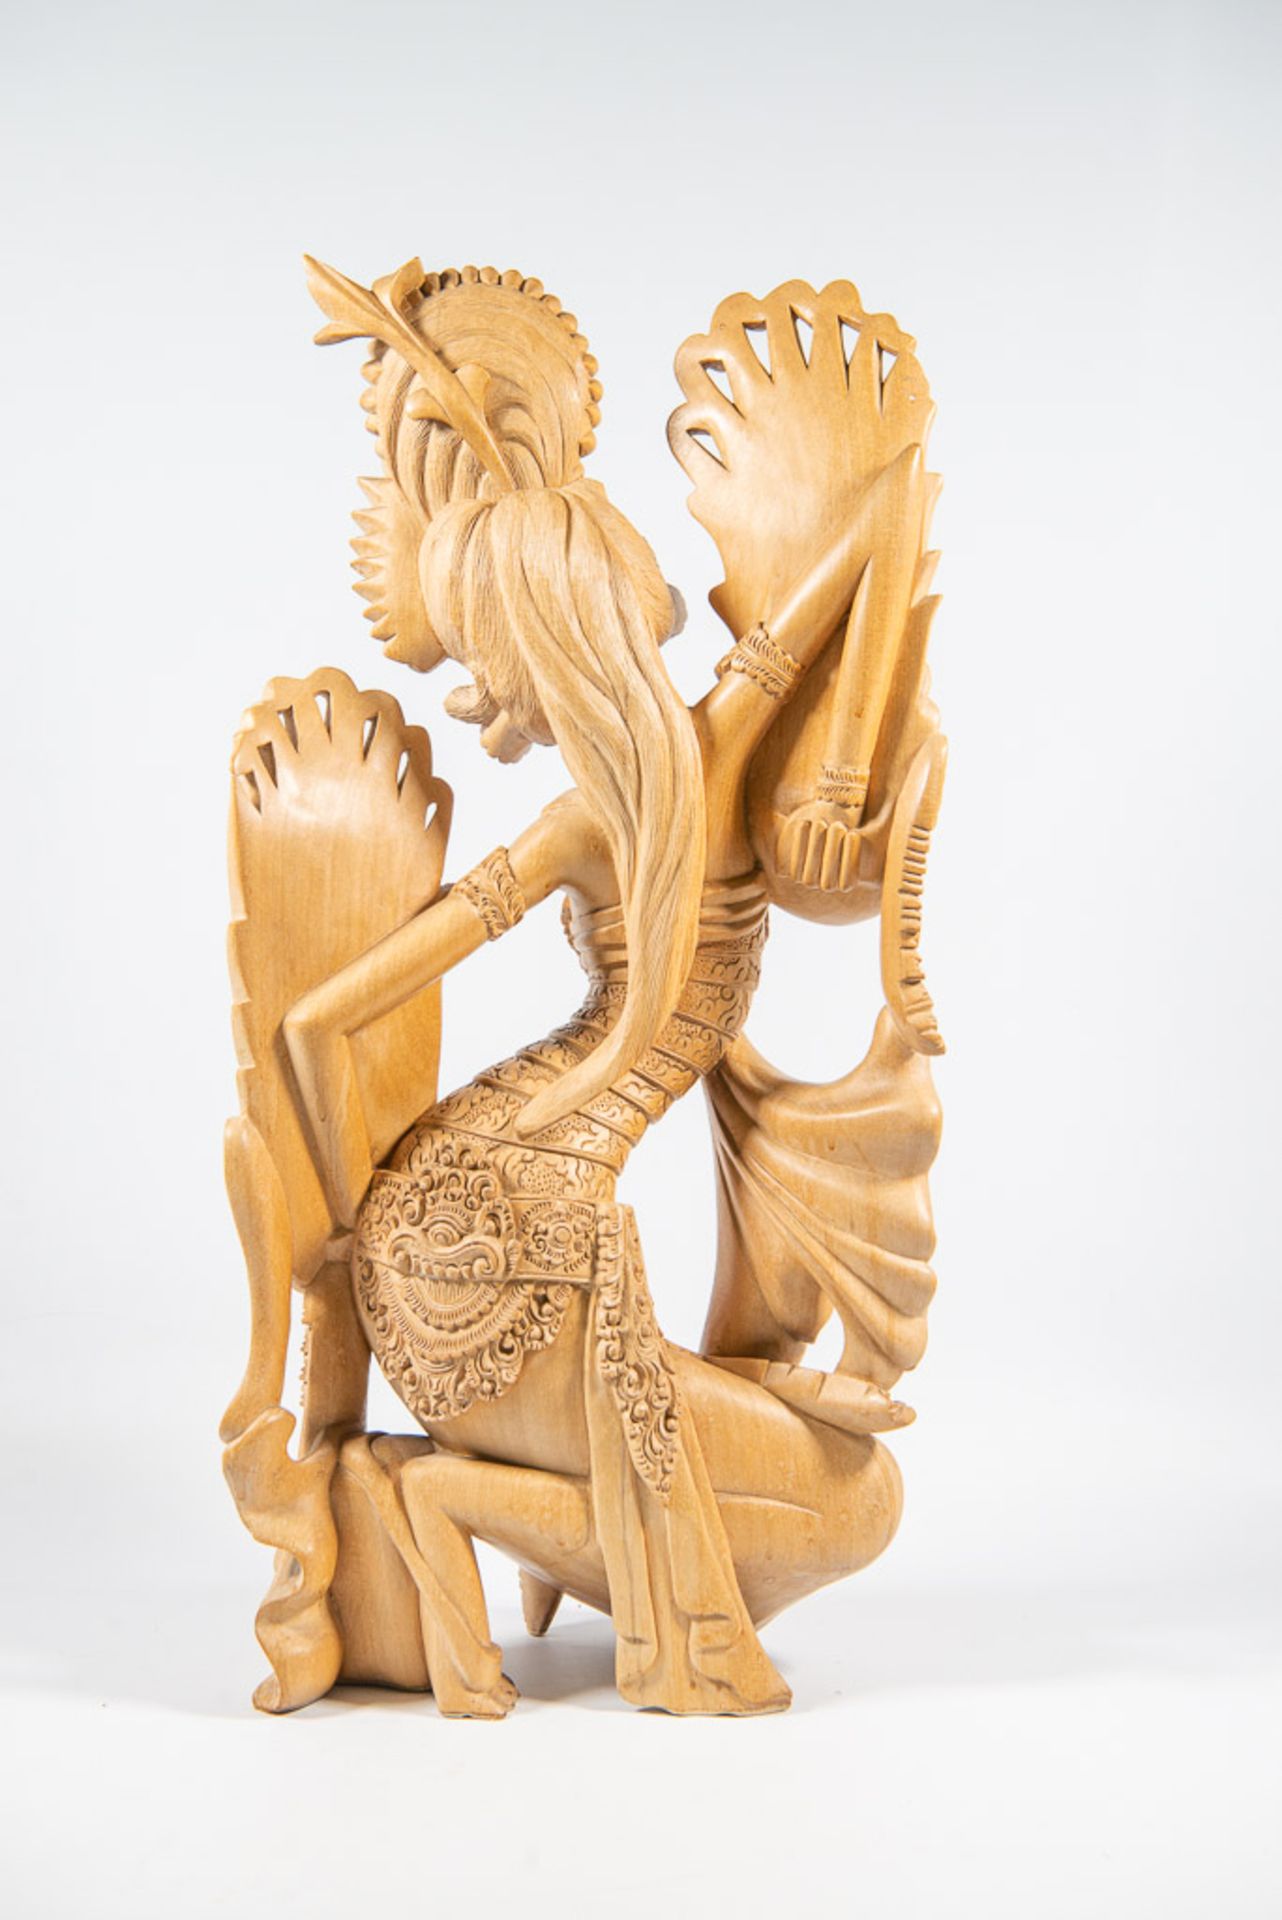 Indonesian wood sculpture - Image 4 of 5